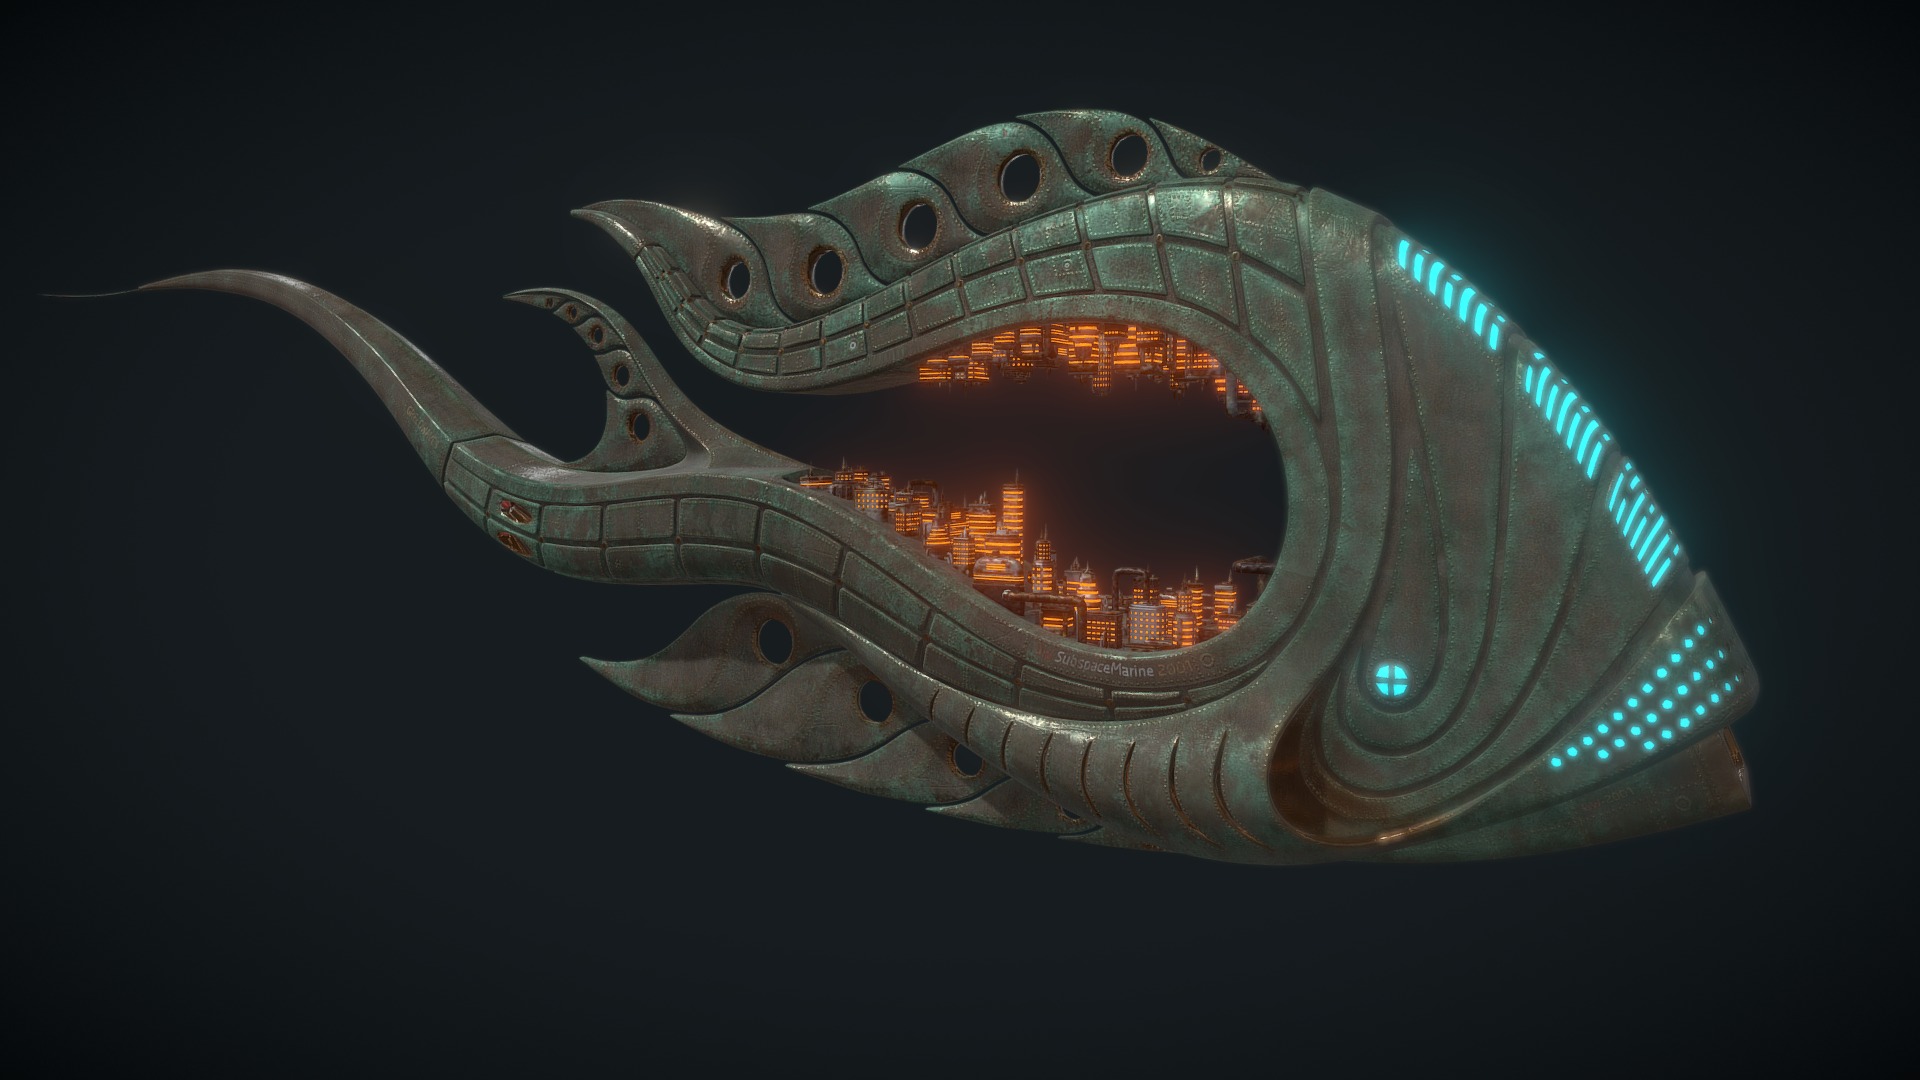 3D model SSM GW 2001 Sketchfab - This is a 3D model of the SSM GW 2001 Sketchfab. The 3D model is about a close-up of a snake.